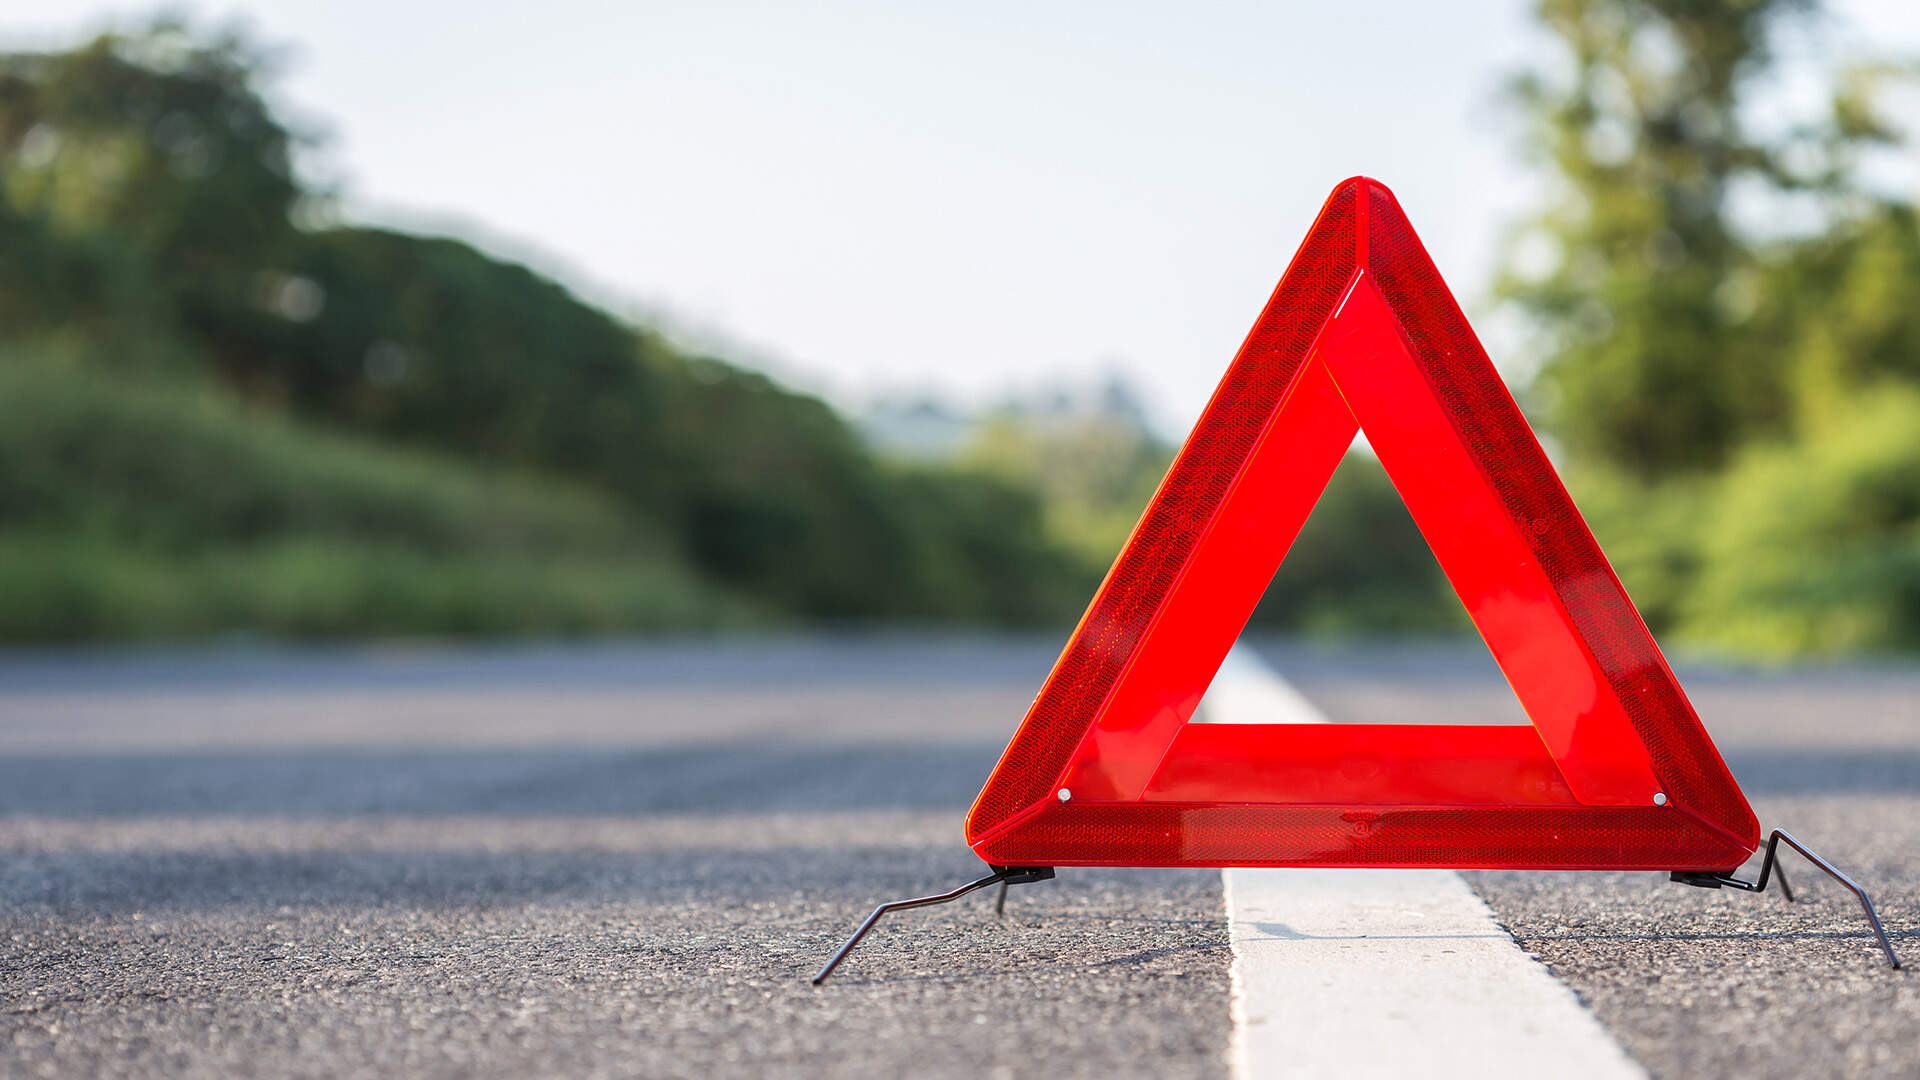 Emergency warning triangle sign on the road